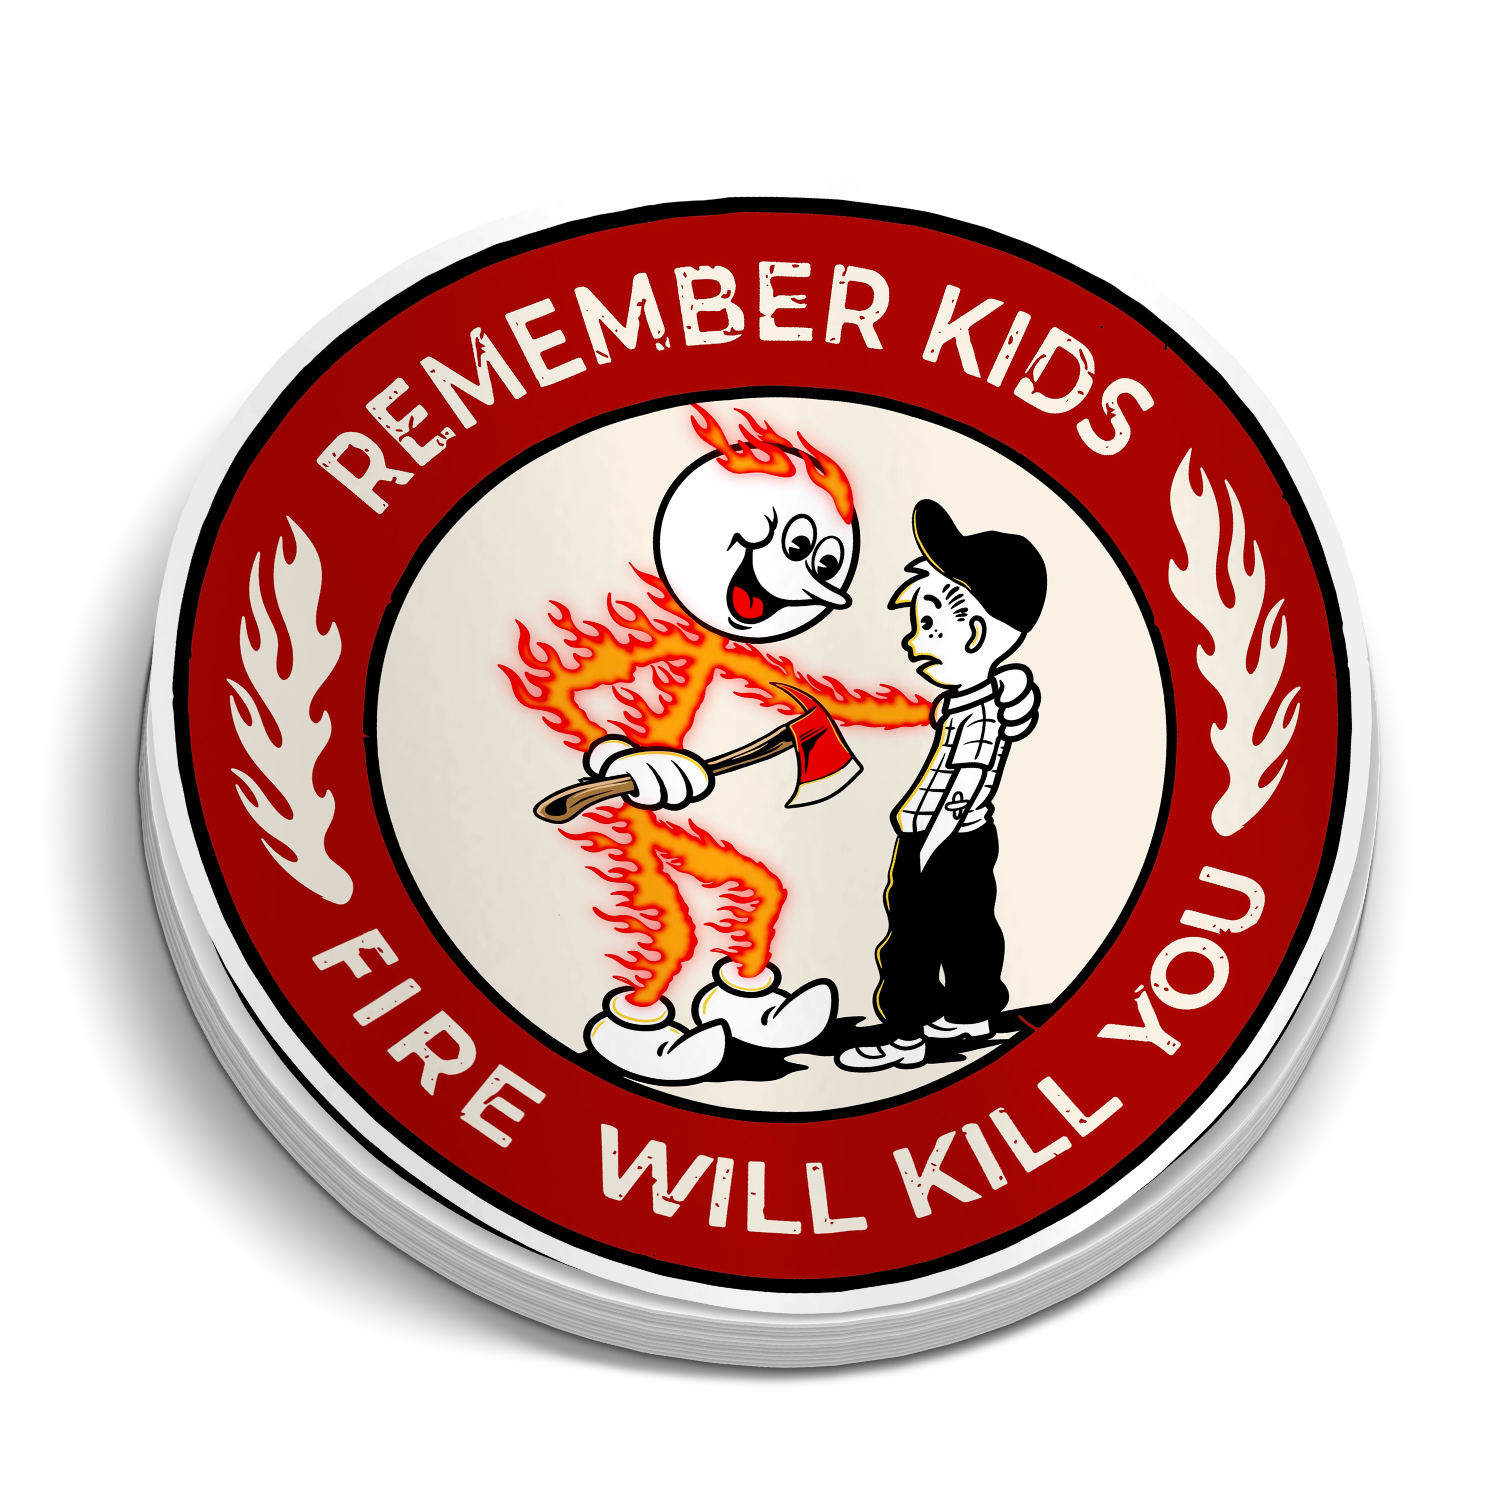 Remember Kids Fire Decal